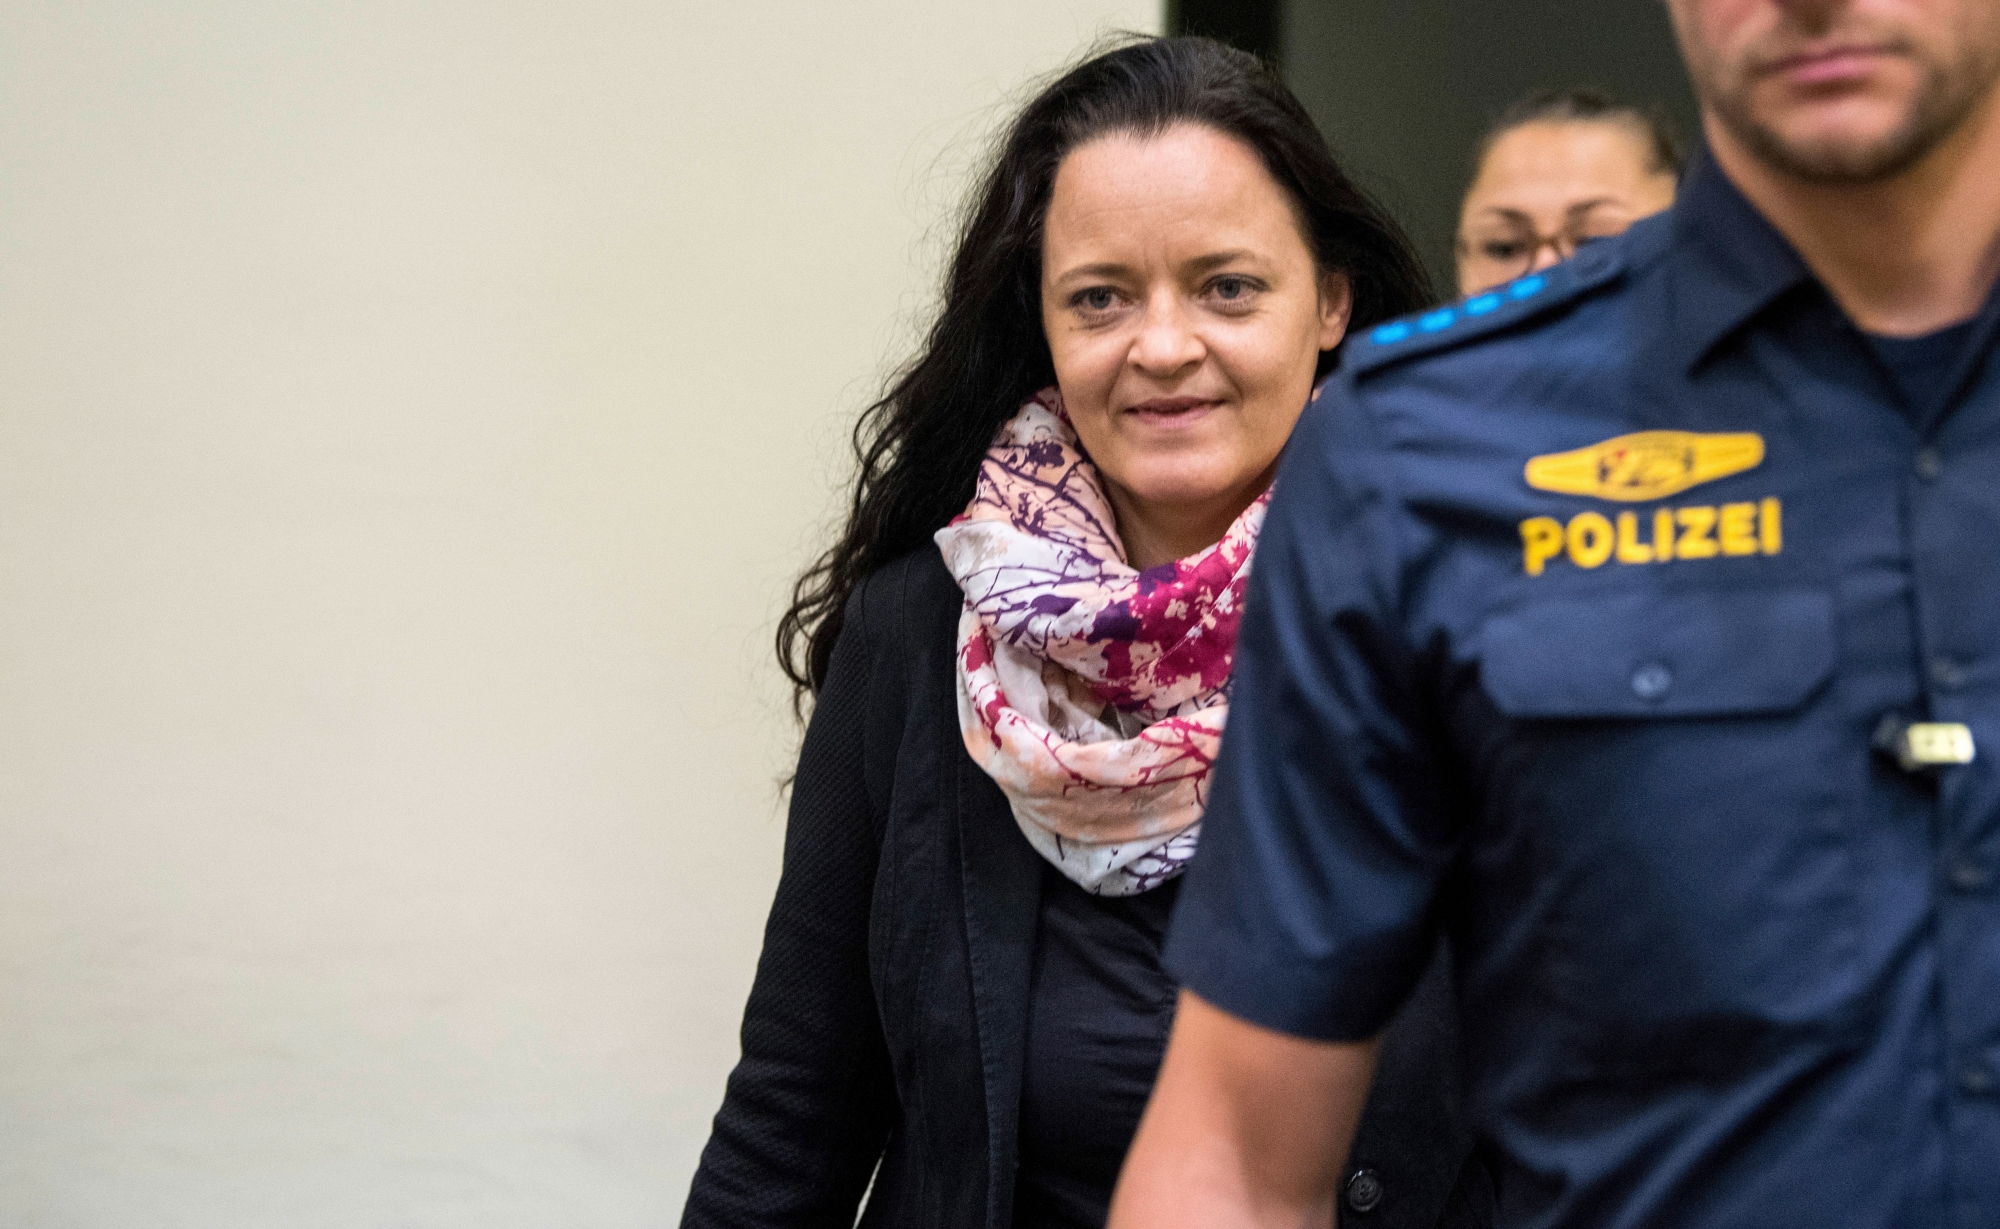 epa06879717 Defendant Beate Zschaepe (L) arrives to the NSU trial at the higher regional court (Oberlandesgericht, OLG) in Munich,  Germany, 11 July 2018.  The court found Zschaepe guilty on ten counts of murder on 11 July 2018, some five years after the trial started. The court sentenced her to life imprisonment and established the particular severity of guilt. Zschaepe was accused of being a founding member of the extreme right-wing National Socialist Underground (NSU) terror cell and faced charges of complicity in the murder of nine Turkish and Greek immigrants and a policewoman between 2000 and 2007, as well as two bombings in immigrant areas of Cologne, and 15 bank robberies.  EPA/MARC MUELLER GERMANY TRIALS NSU